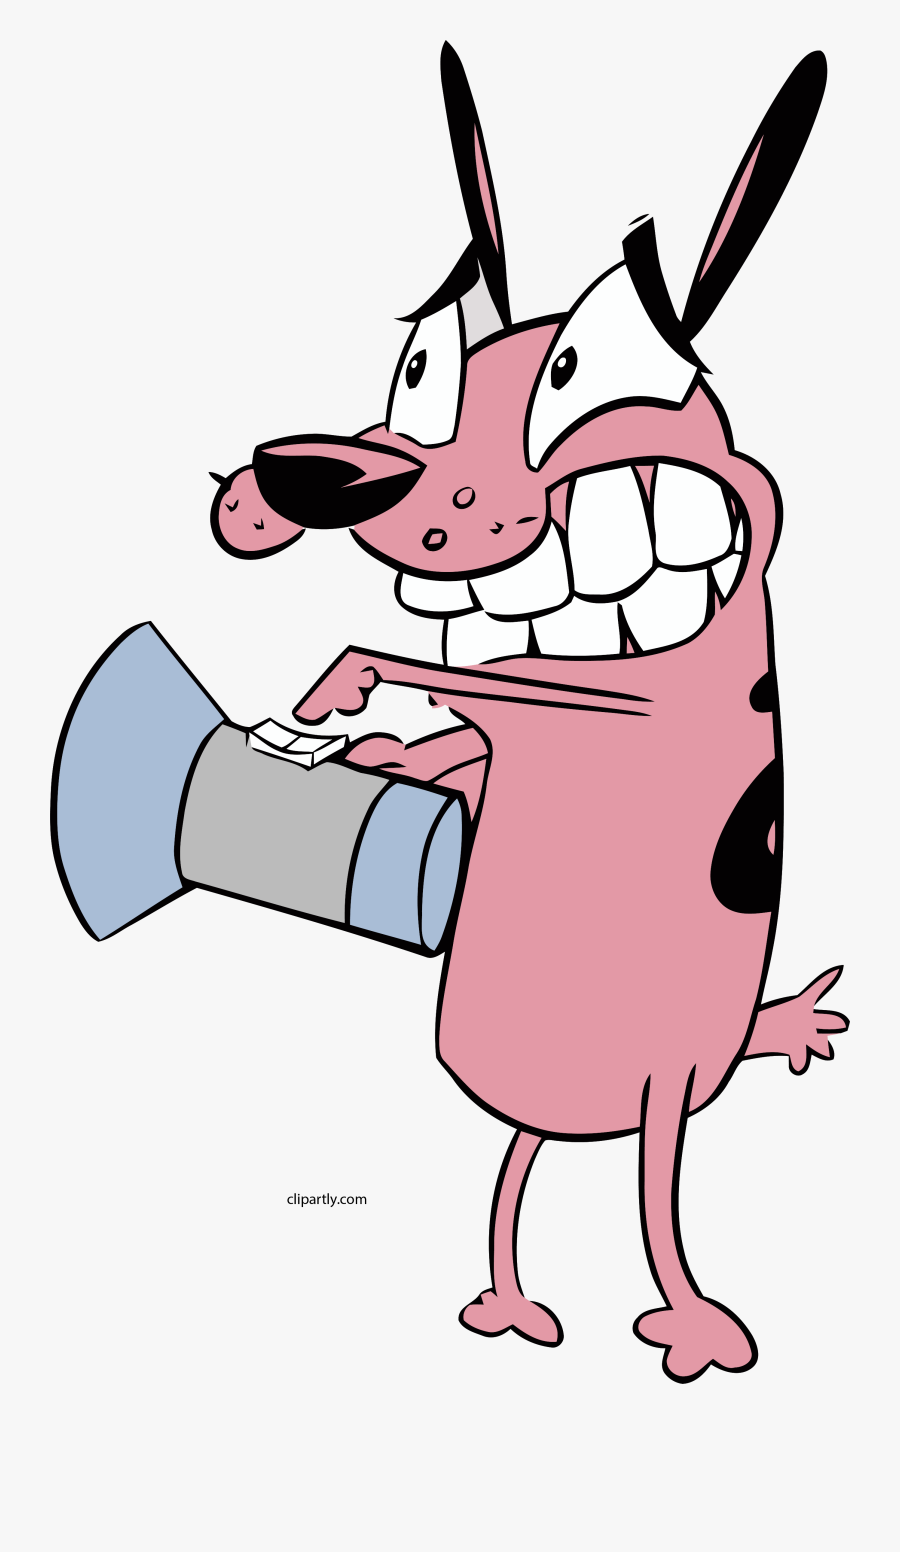 Transparent Courage Clipart - Courage The Coward Cowardly Dog, Transparent Clipart